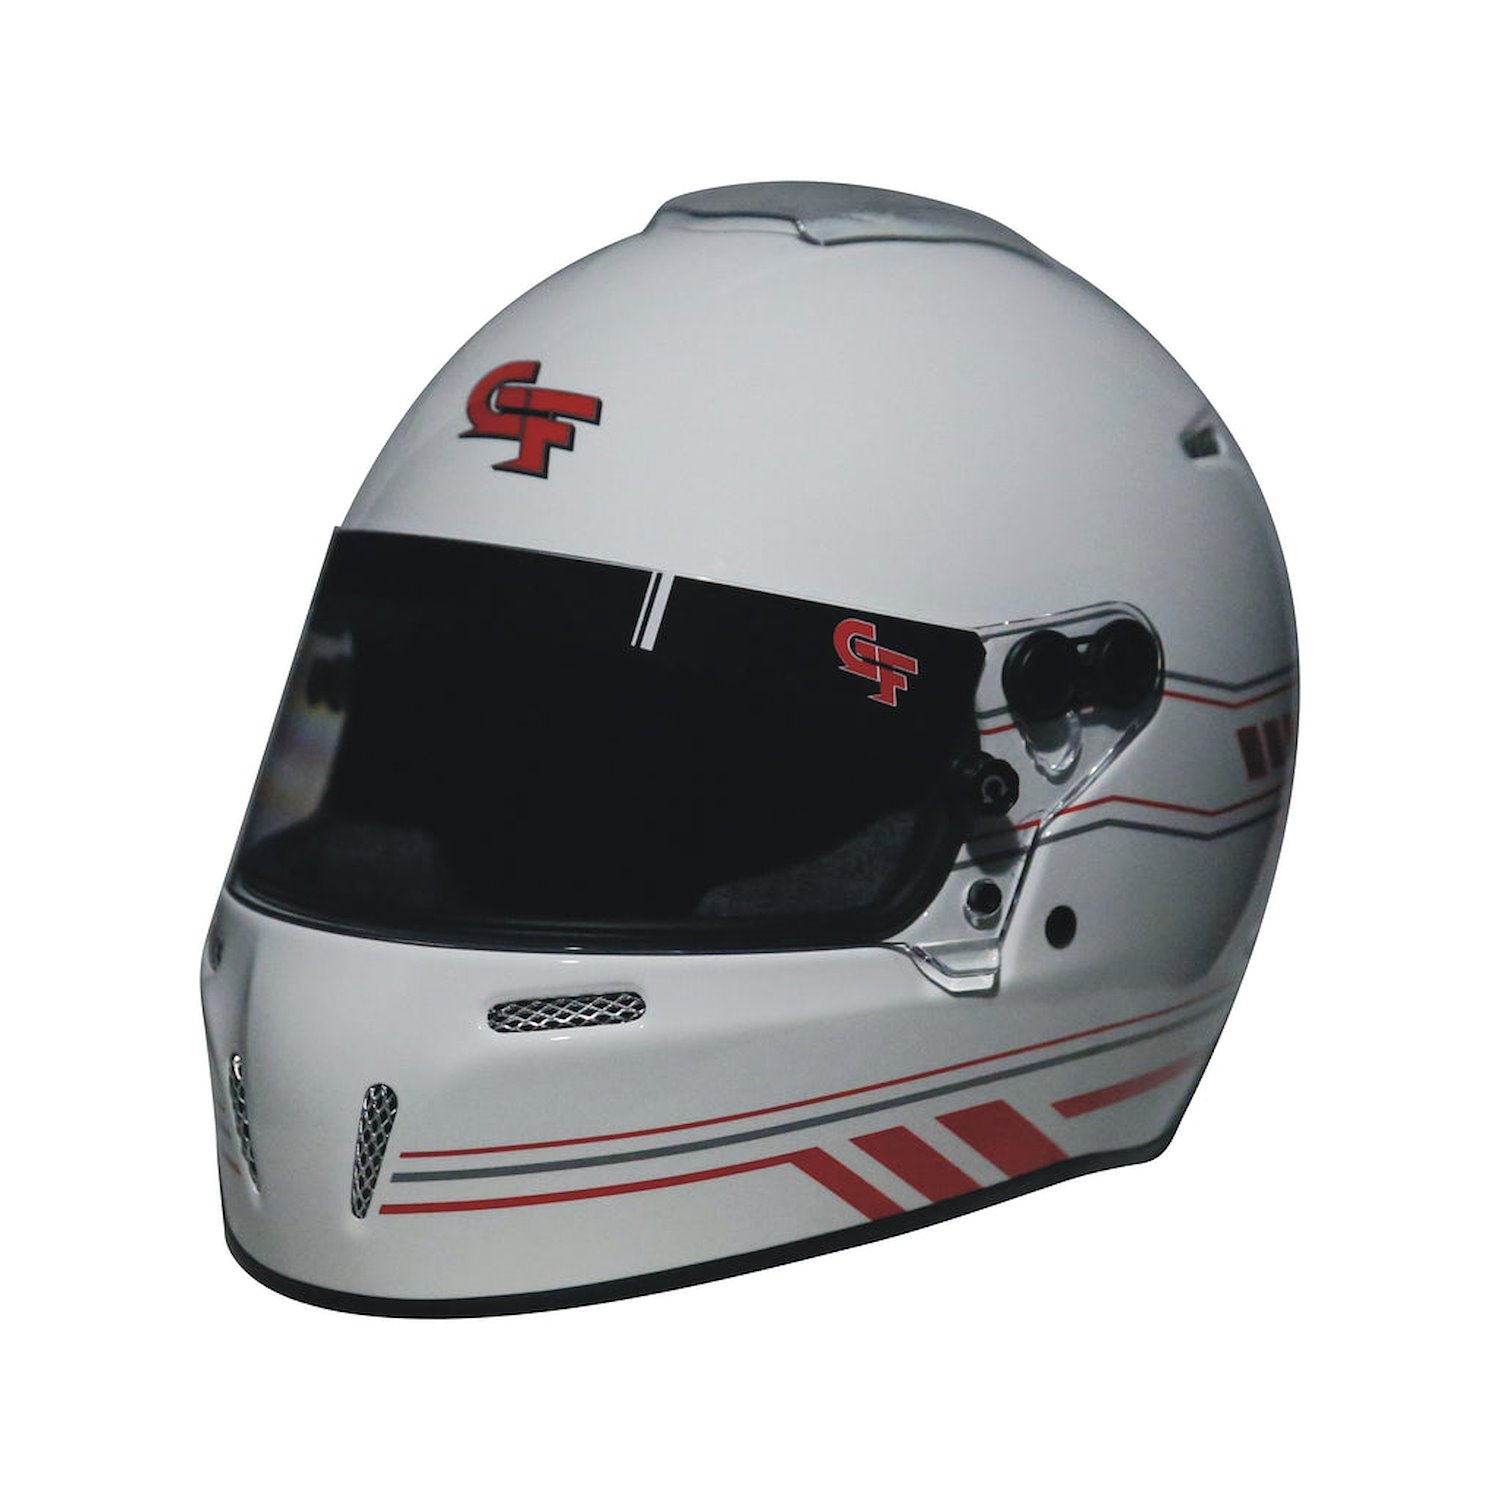 14102XLGW2 Helmet, Nighthawk Graphics SA2020, Extra Large, White/Red